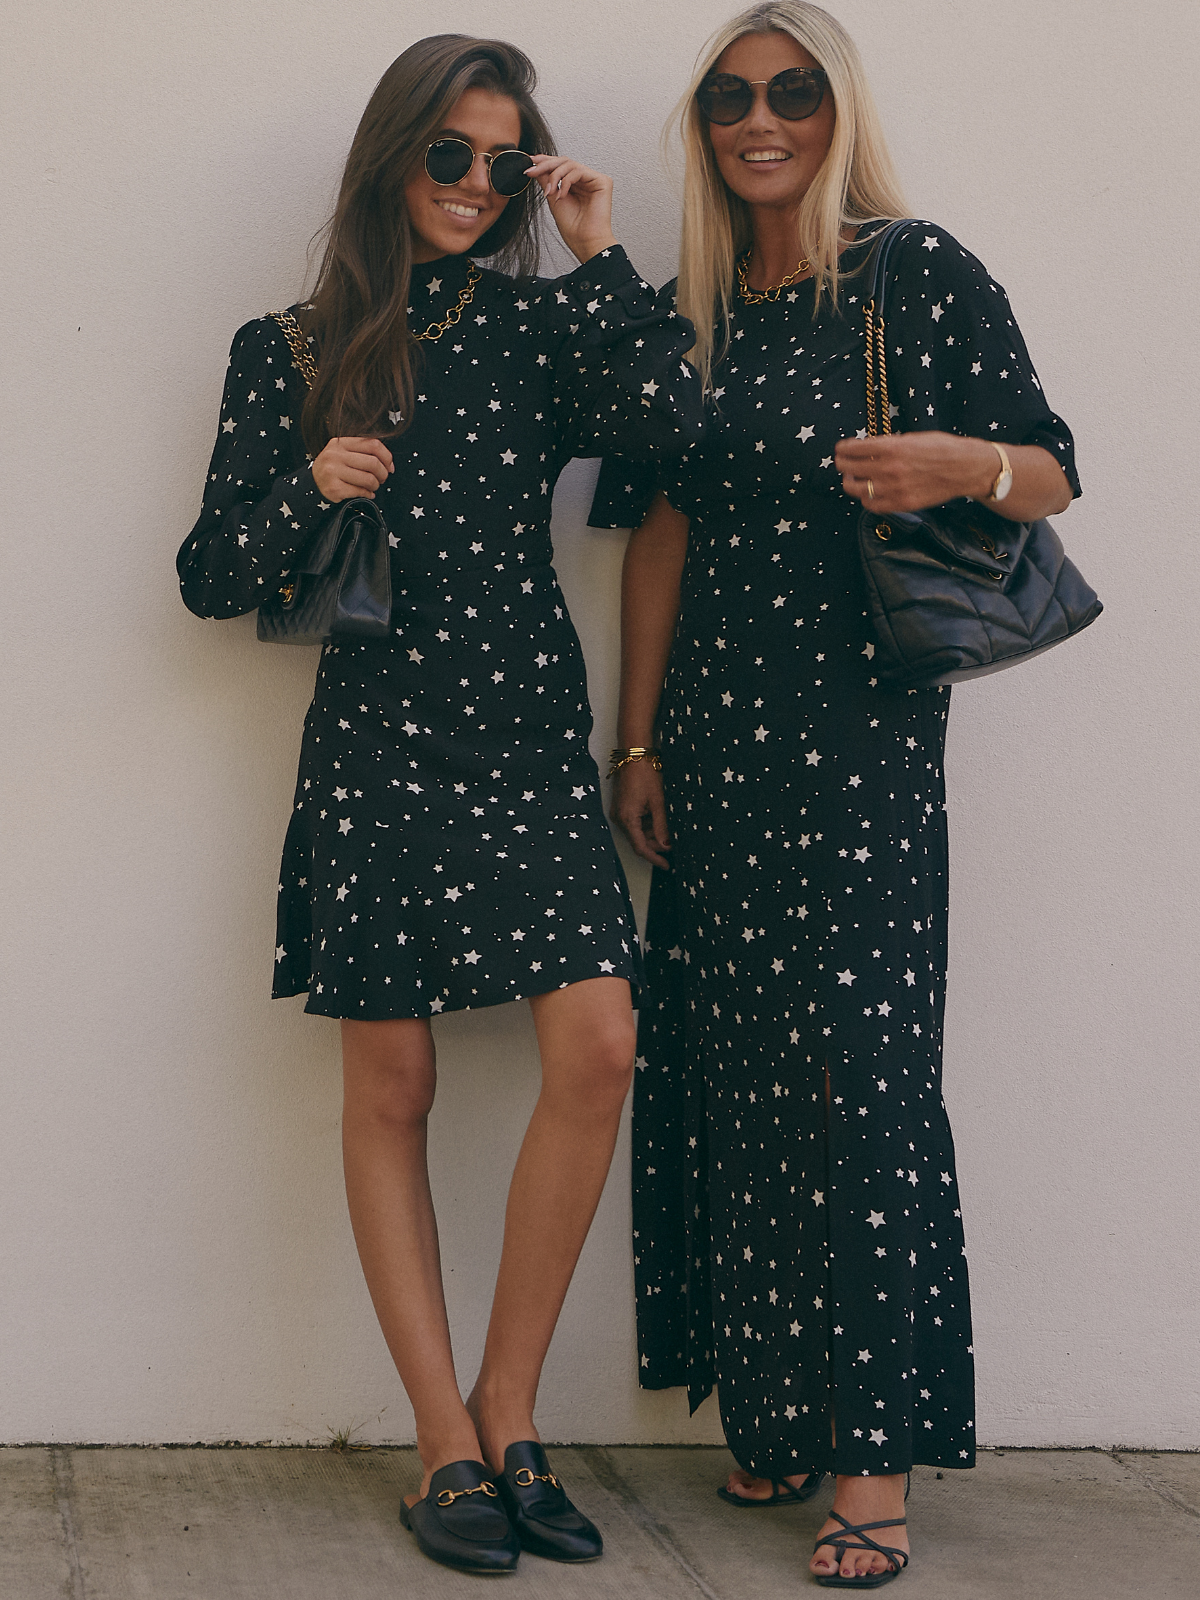 Carrie Black And White Star Print Dress